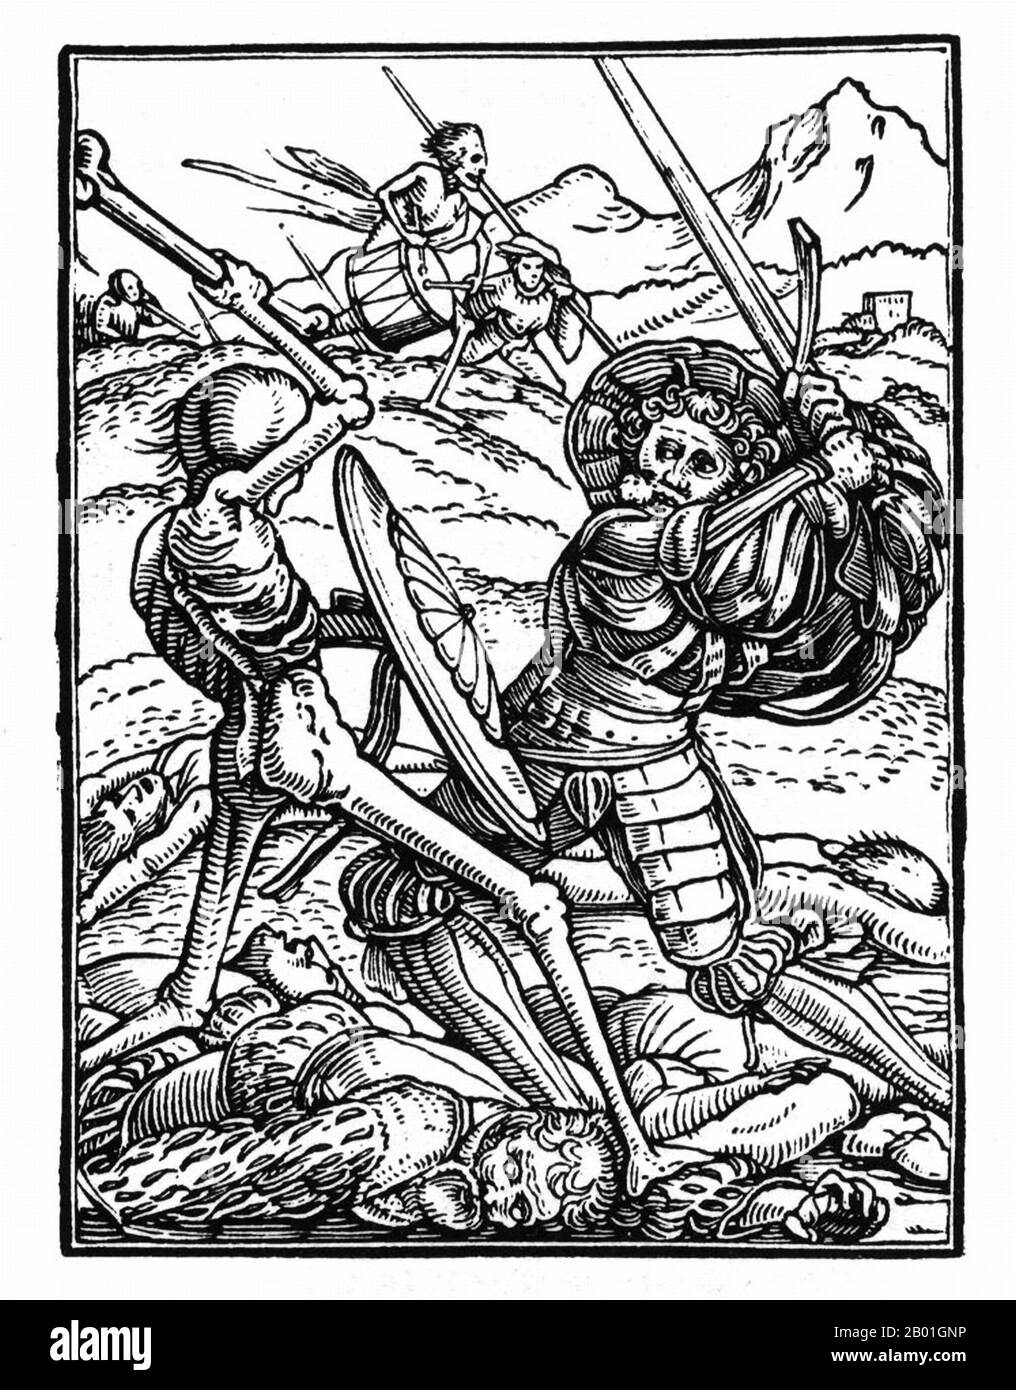 Germany: A scene from 'The Dance of Death' by Hans Holbein the Younger (c. 1497-1543), 16th century.  This is one of a celebrated series of small woodcuts that Holbein designed on the theme of Death. In the words of Christian Rümelin: 'Death is depicted in several guises in these illustrations, ranging from the murderous agent (of the monk, merchant, chandler, rich man, knight, earl and nobleman) to the warning commentator (of the pope, emperor, cardinal, judge, alderman, lawyer, and preacher)'. Stock Photo